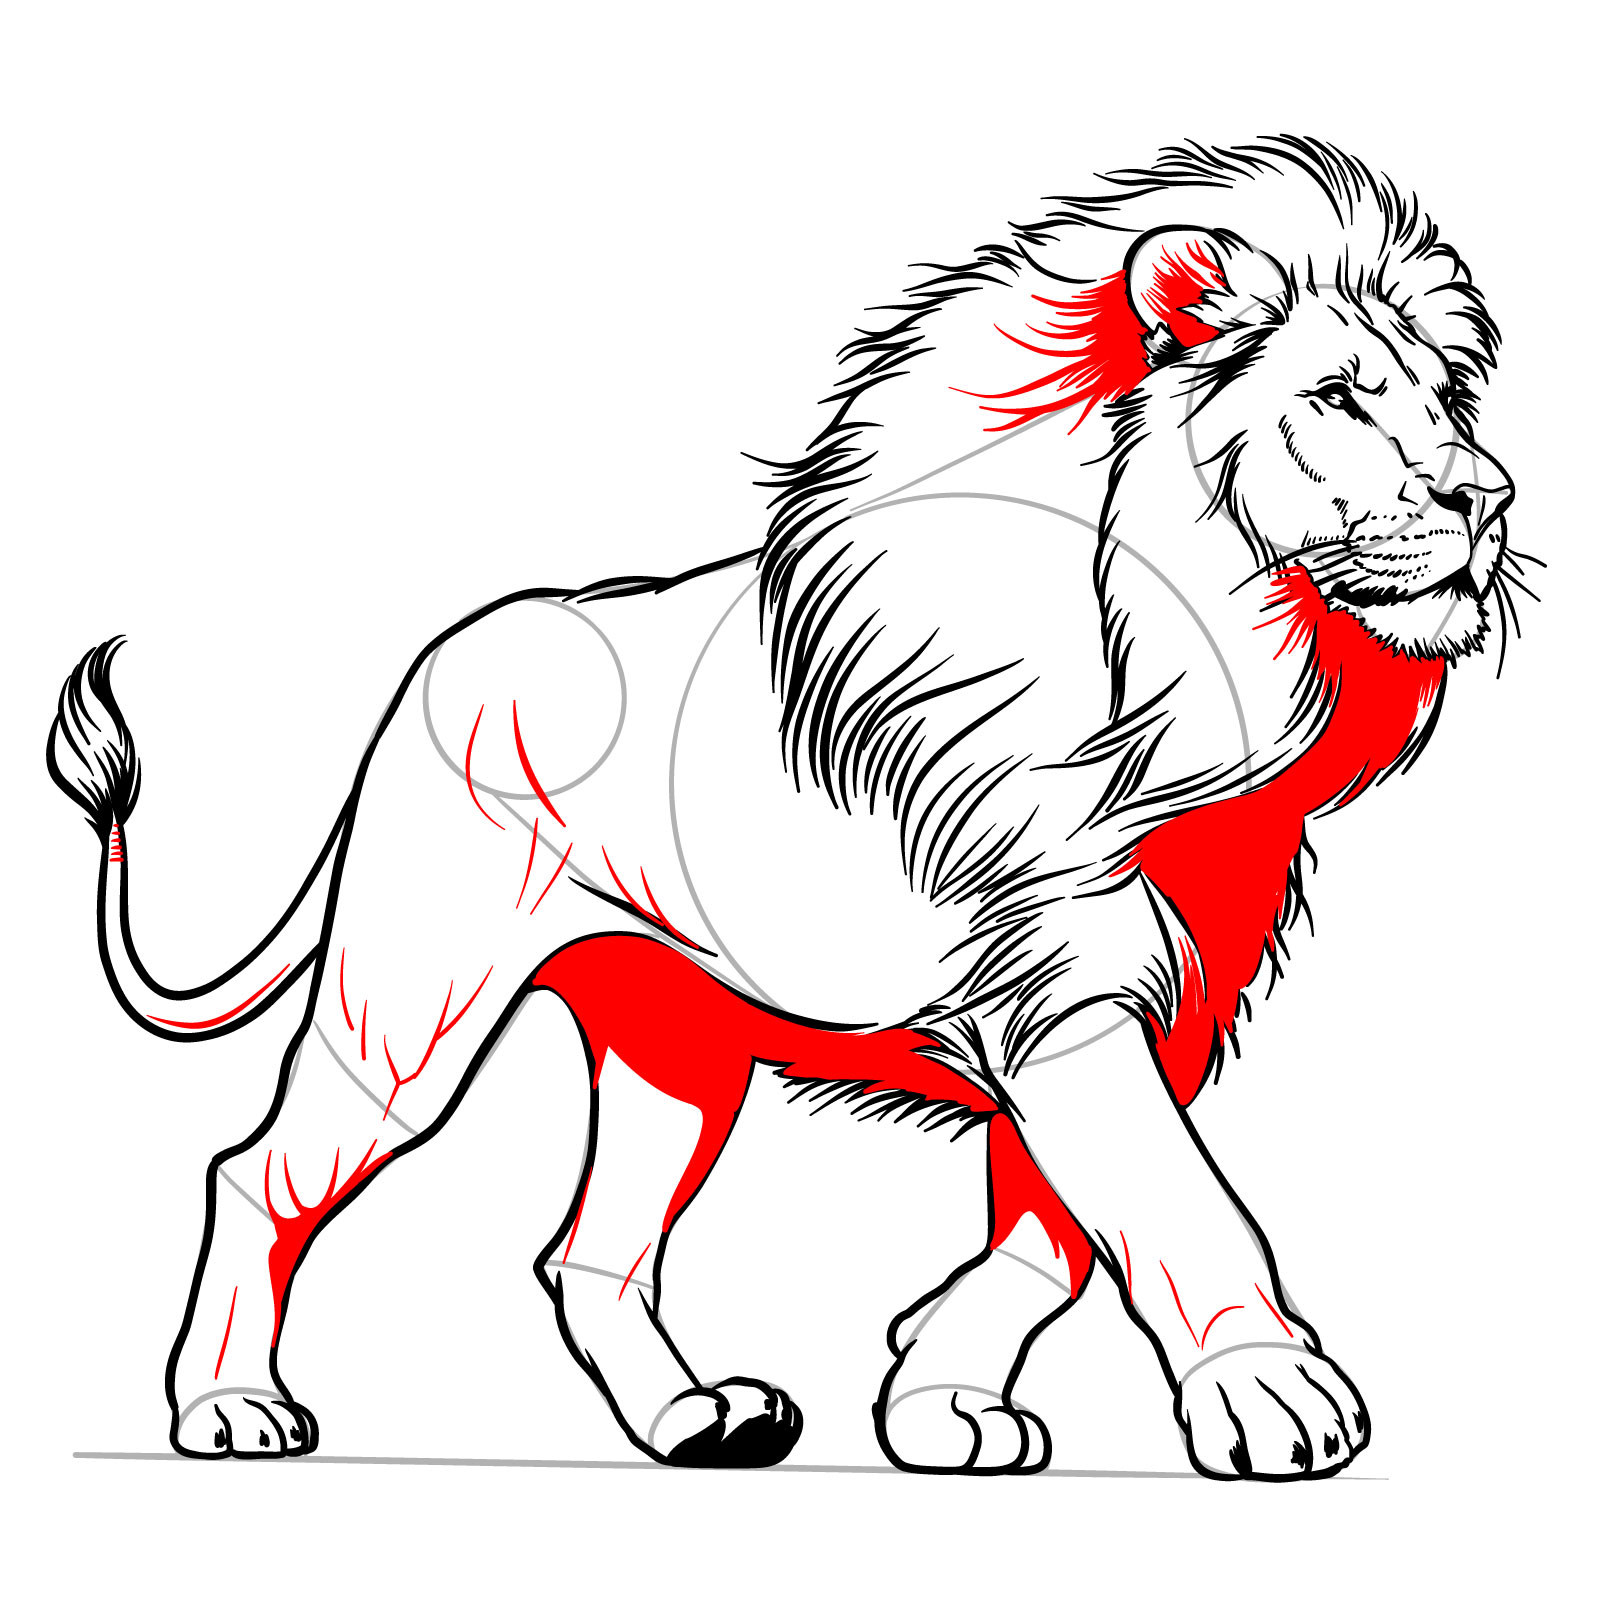 How to draw a walking lion with shading and detailing - step 16